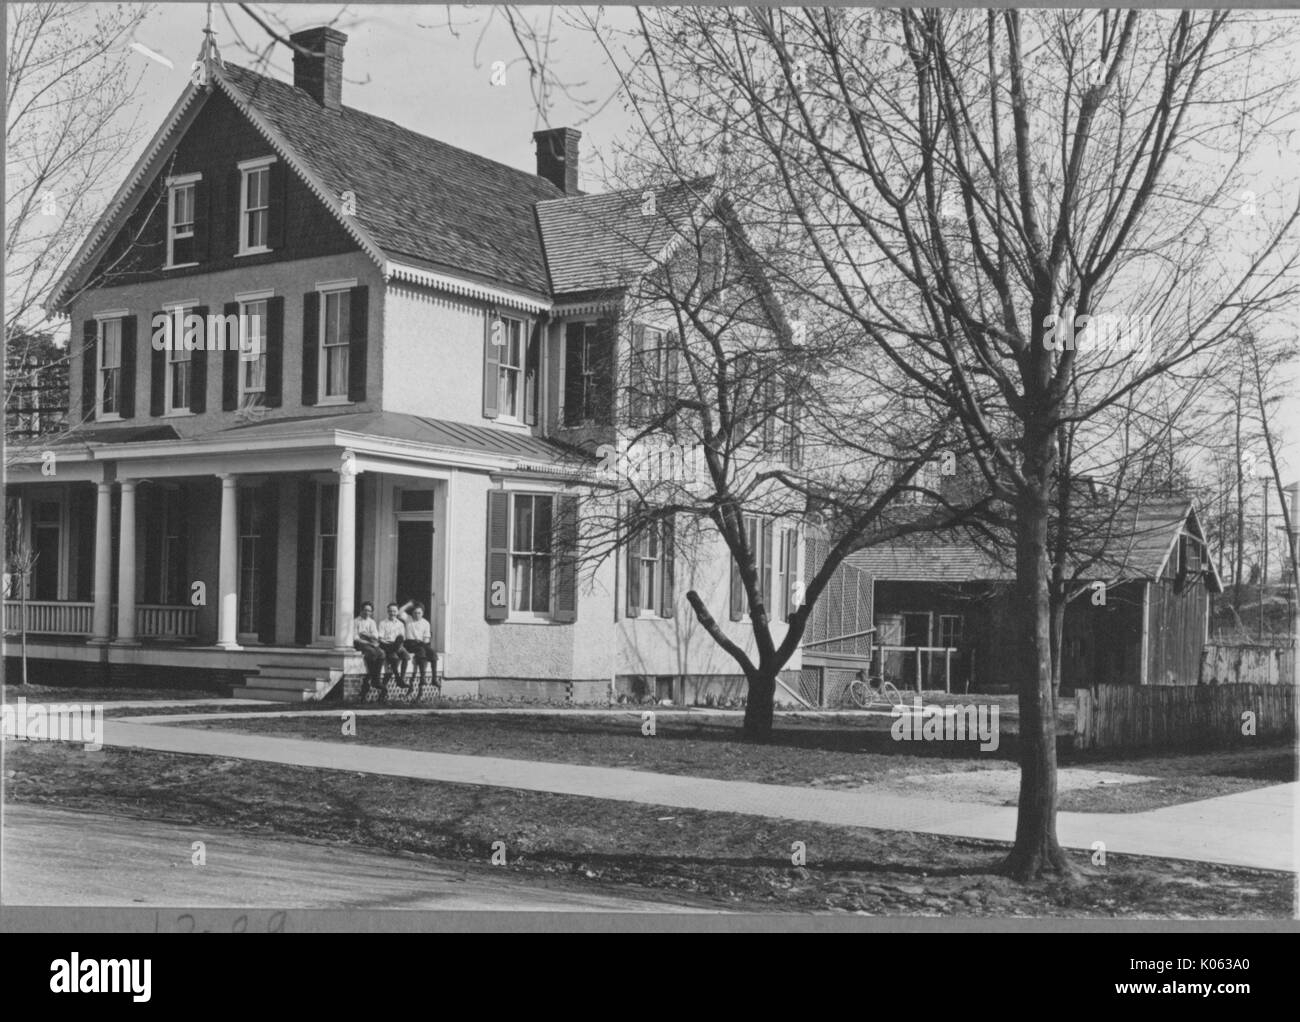 Side-angle view of a two-story single family home near Roland Park and Guilford, the house is light-colored with dark-colored window shutters, there is a porch with light-colored columns and a large wood shed in the backyard, United States, 1910. This image is from a series documenting the construction and sale of homes in the Roland Park/Guilford neighborhood of Baltimore, a streetcar suburb and one of the first planned communities in the United States. Stock Photo